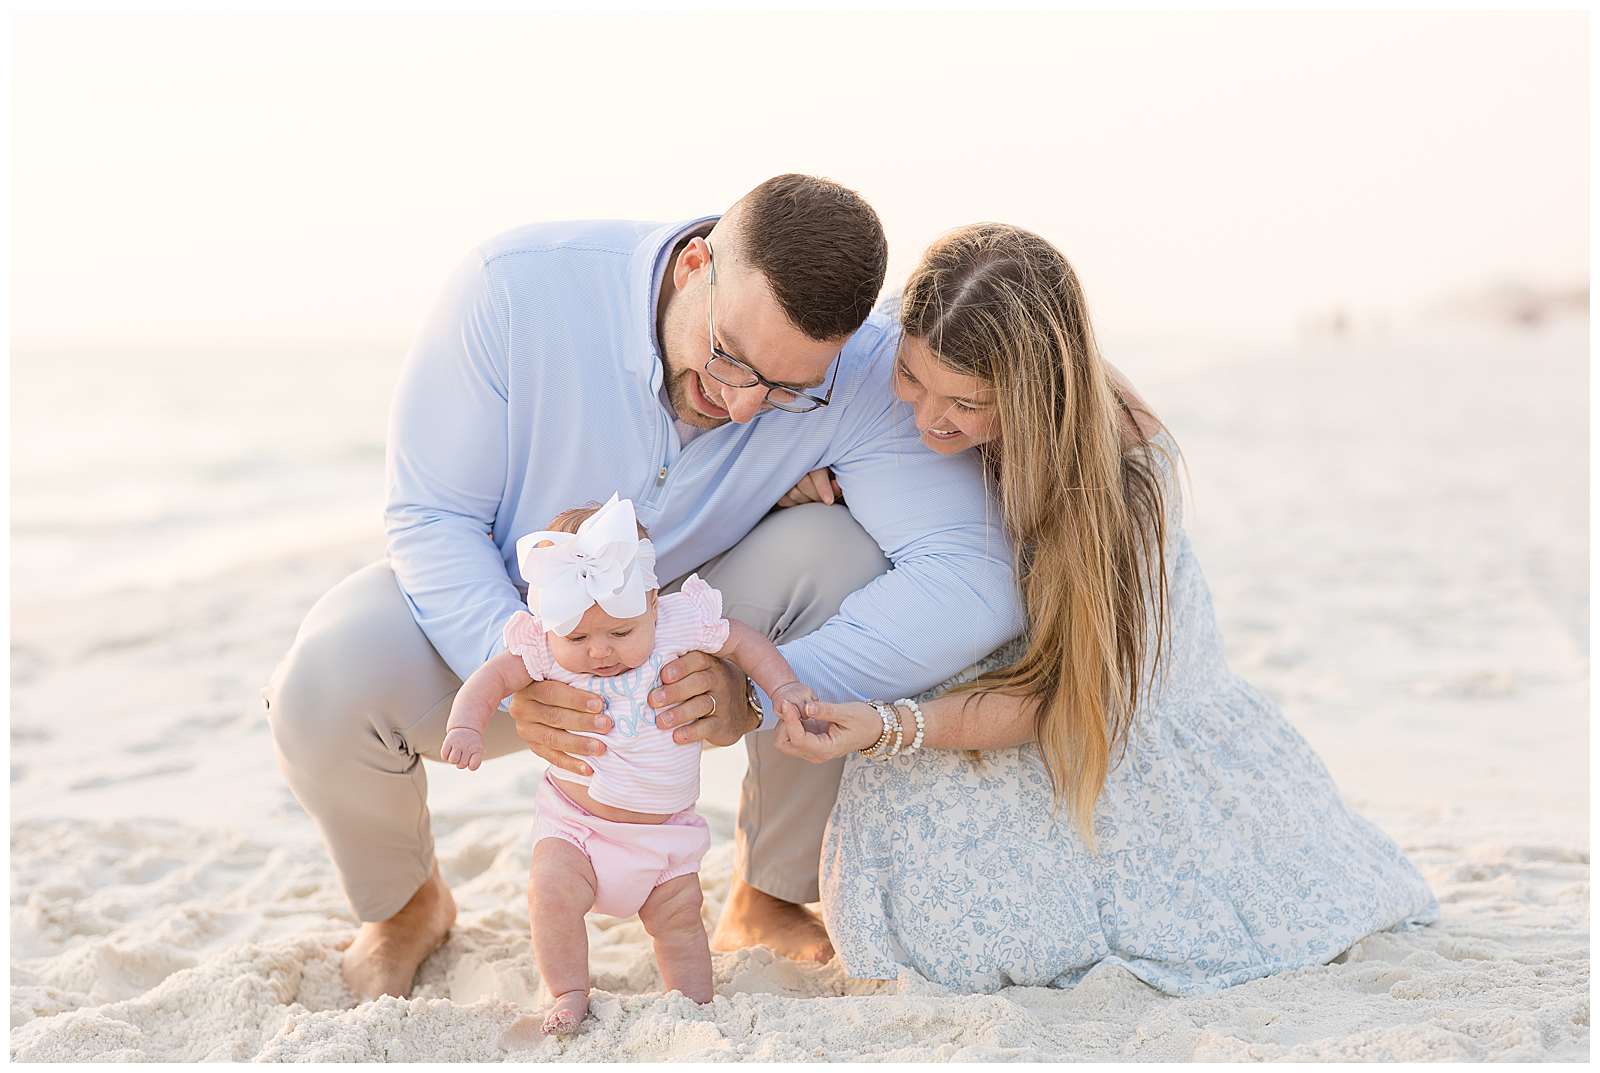 New parents of baby girl squat down on Rosemary Beach together and new Dad, holds his baby girl up as she puts her toes in the sand.  The baby wears a pink and white striped outfit with her initials monogrammed on the front and a big, white, headband bow.  See more of this adorable, Rosemary Beach family portrait session on the blog! -rebeccaricephoto.com